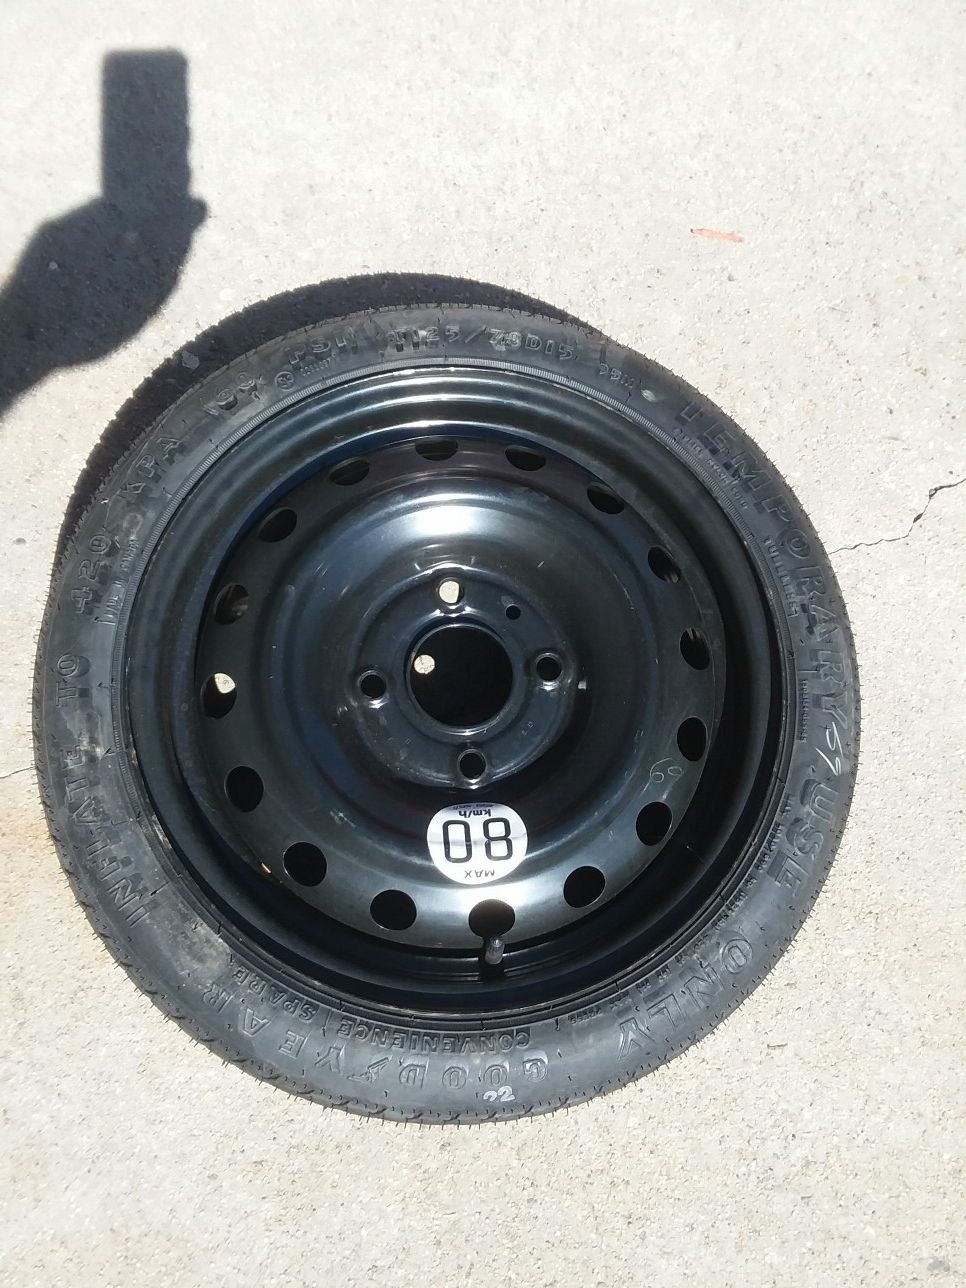 Spare Tire, never used. 4 lugs.